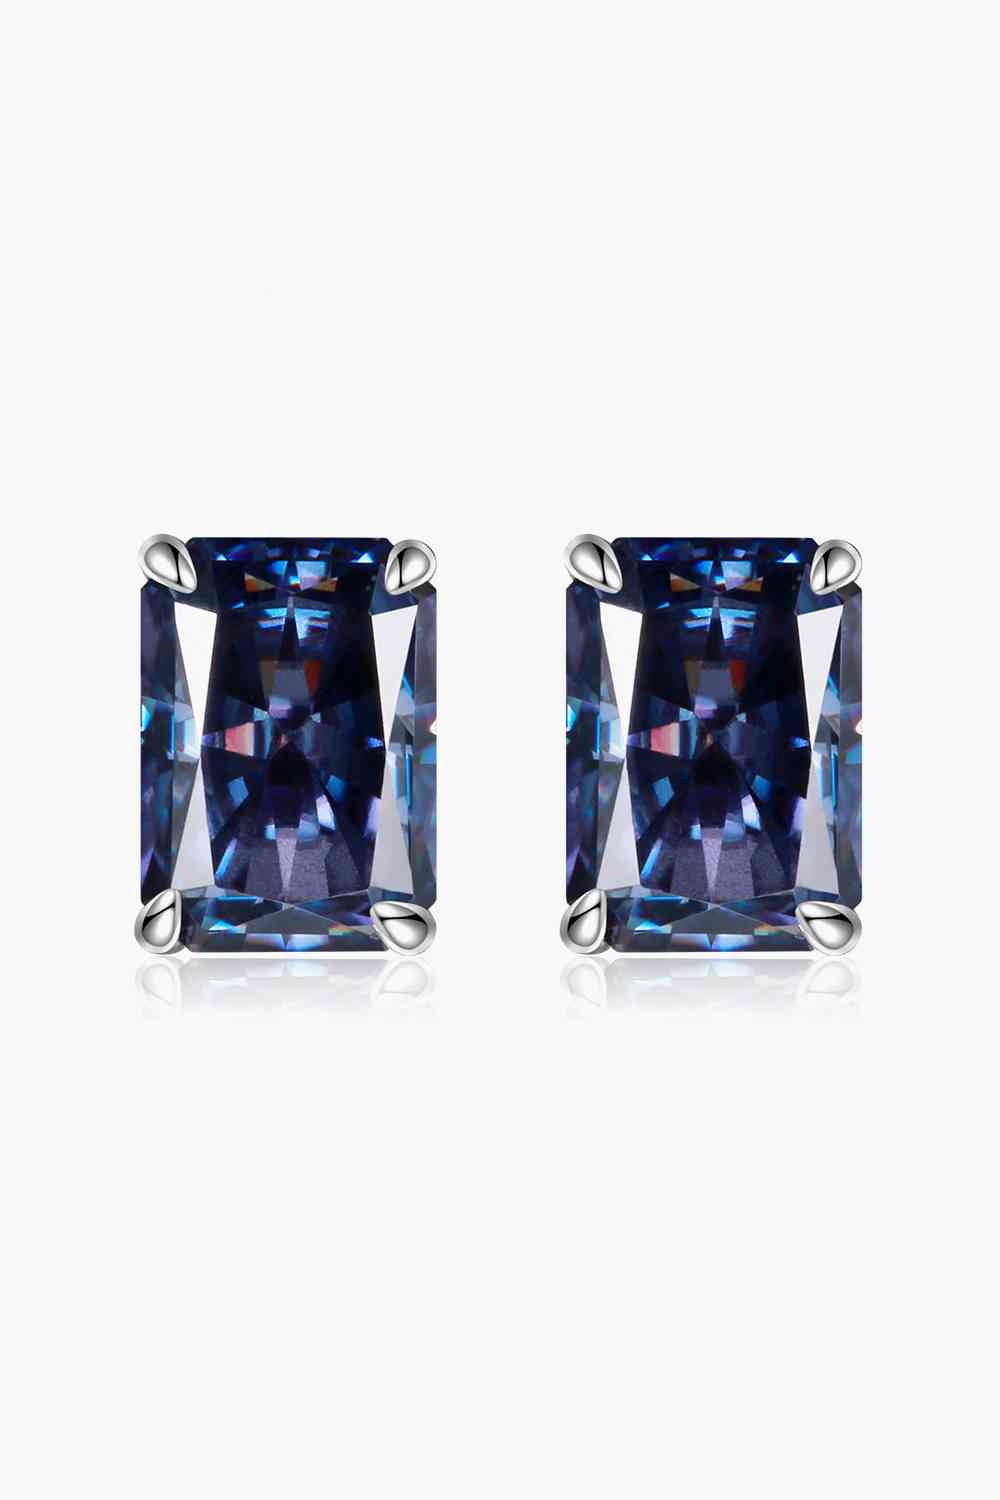 a pair of earrings with a square blue stone